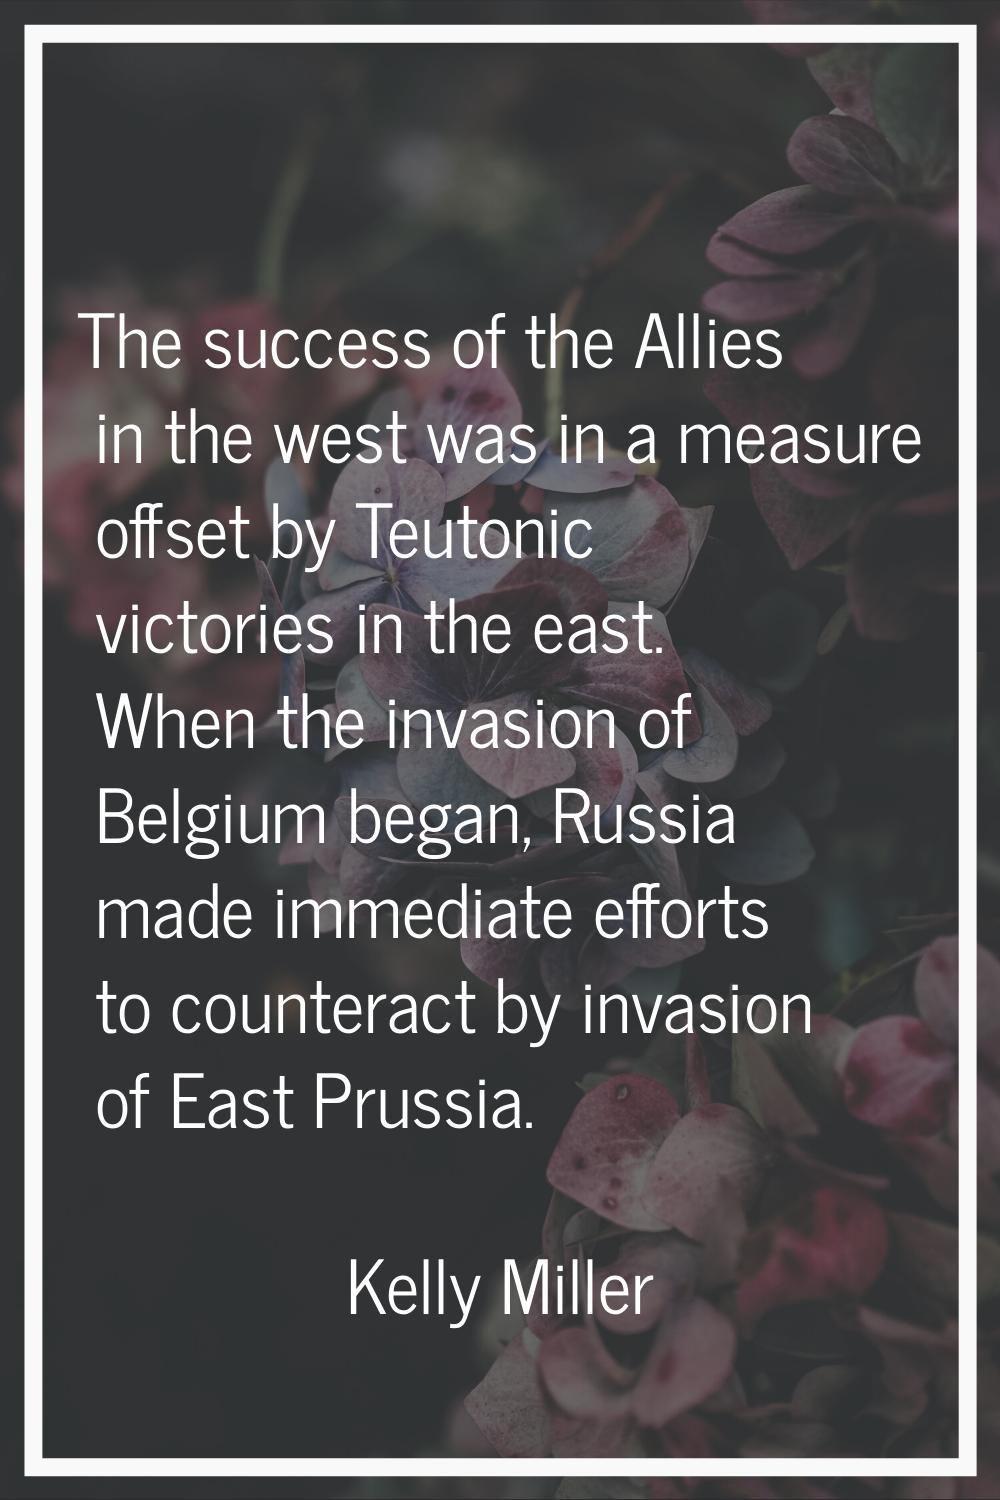 The success of the Allies in the west was in a measure offset by Teutonic victories in the east. Wh